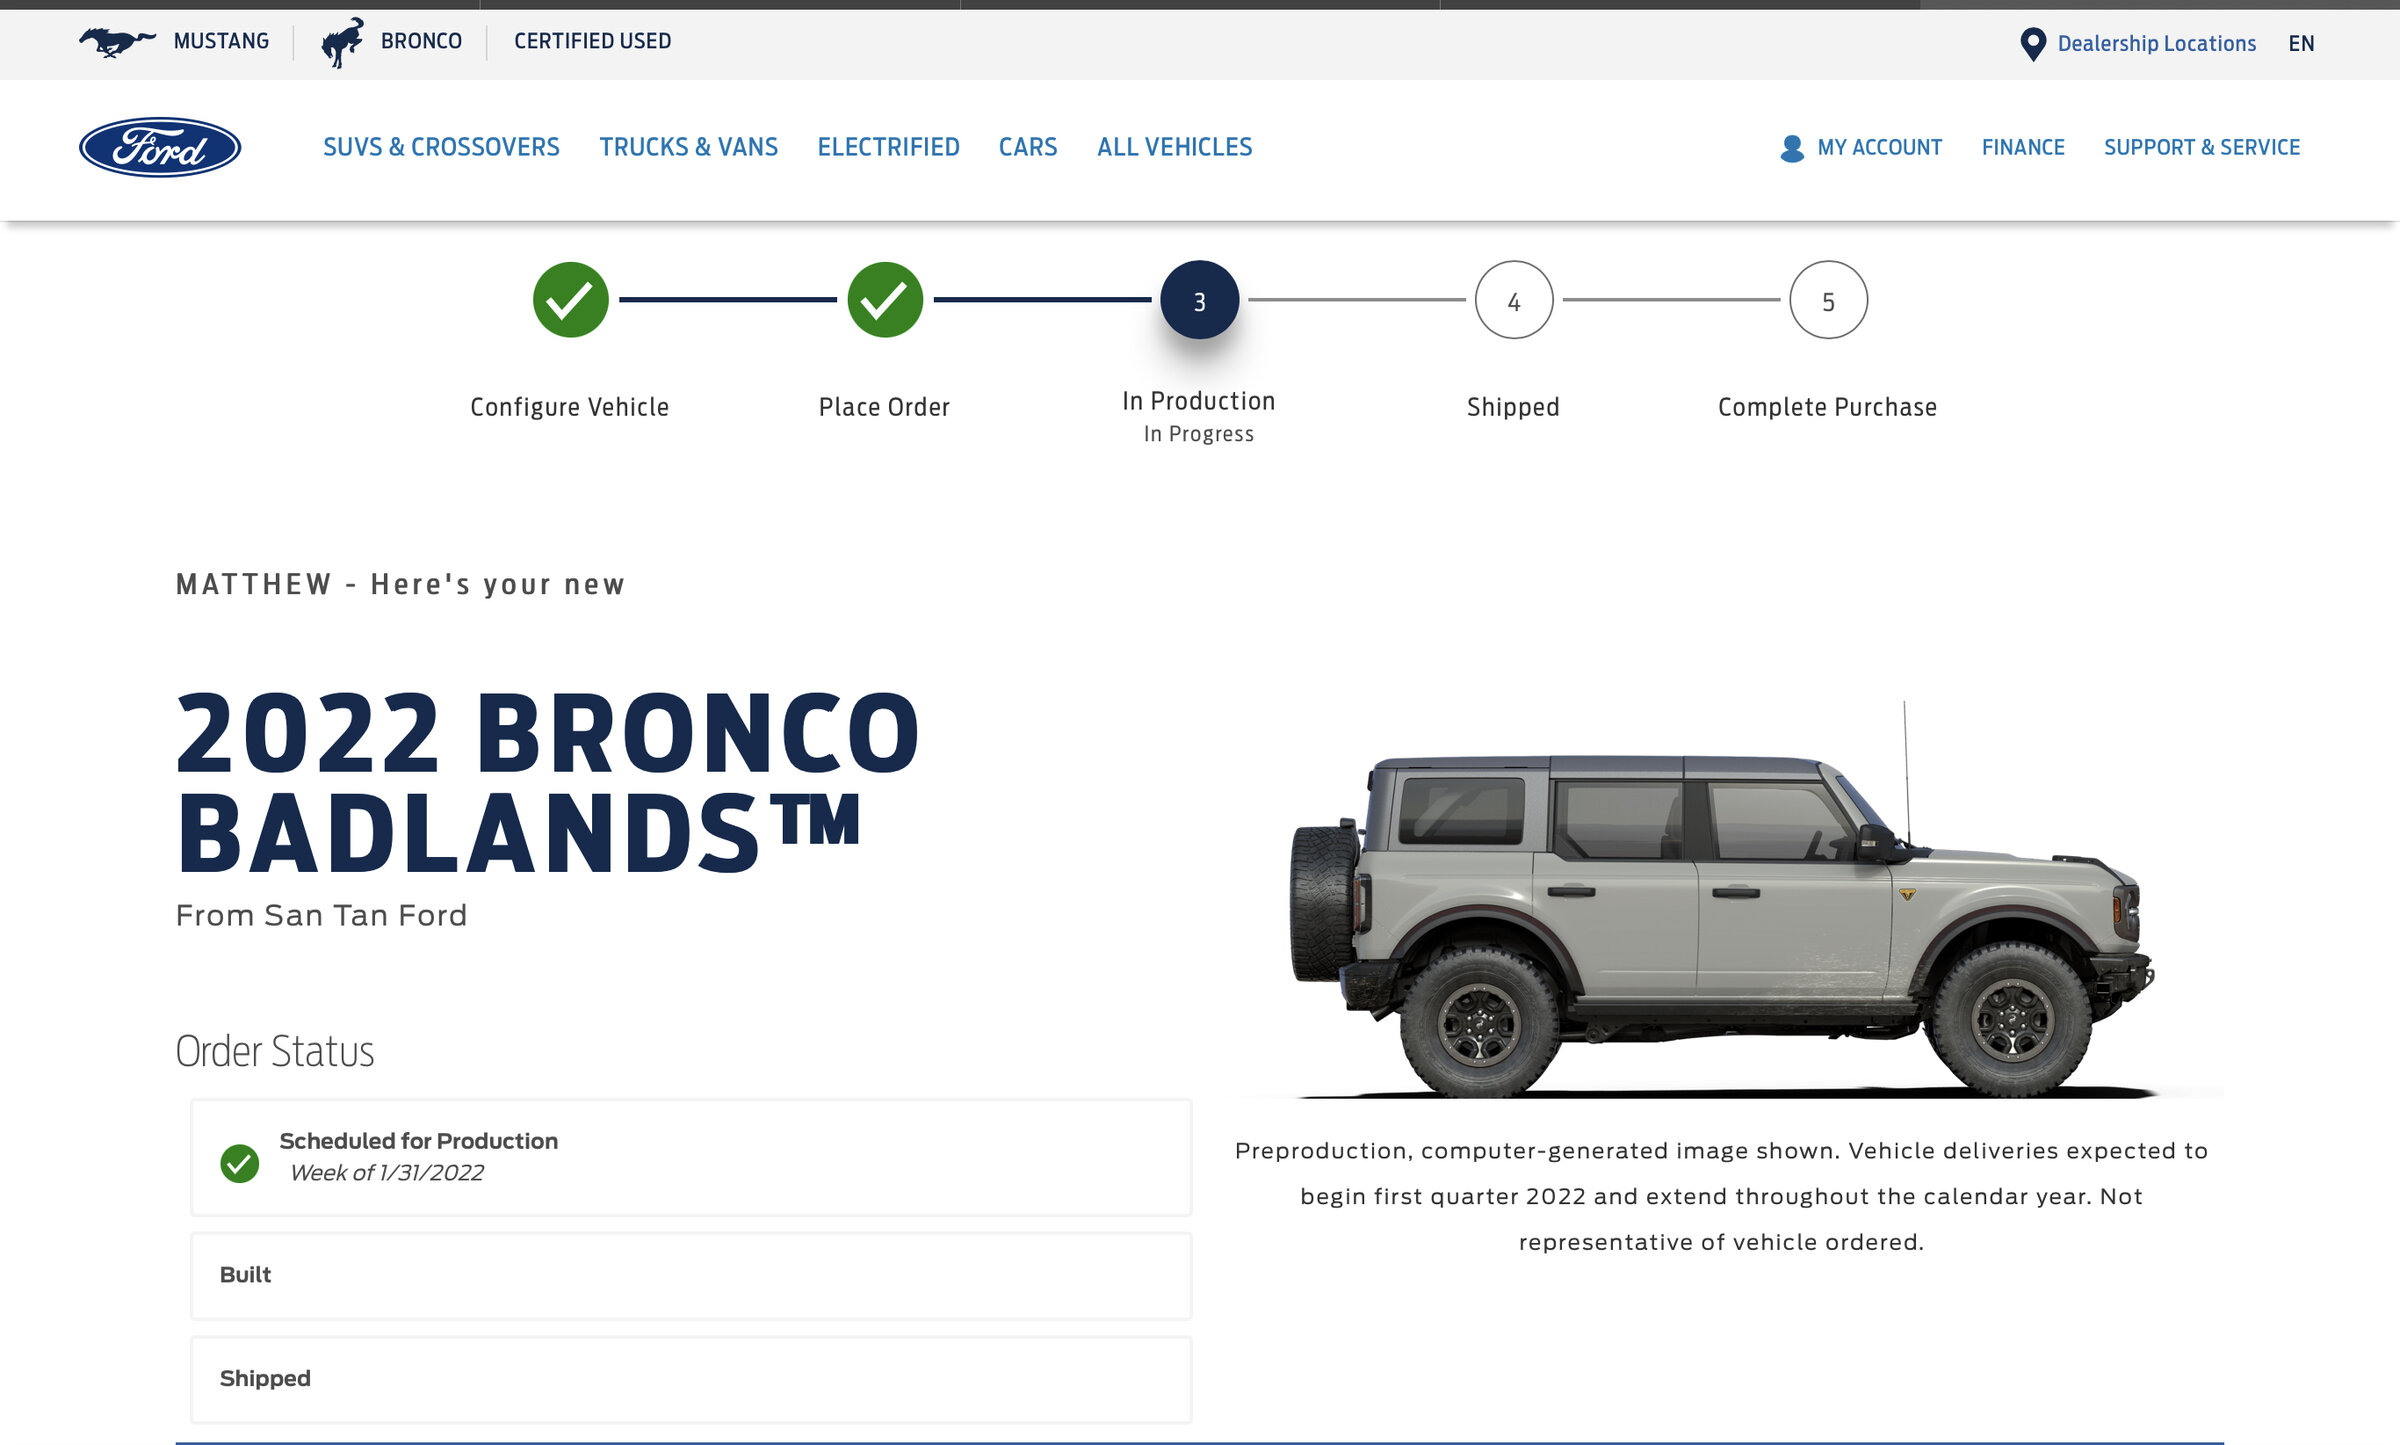 Ford Bronco Production Scheduling Hitting Trackers (12/9) 630E7054-7DEA-4FD8-A05D-BB9AAED25B3B